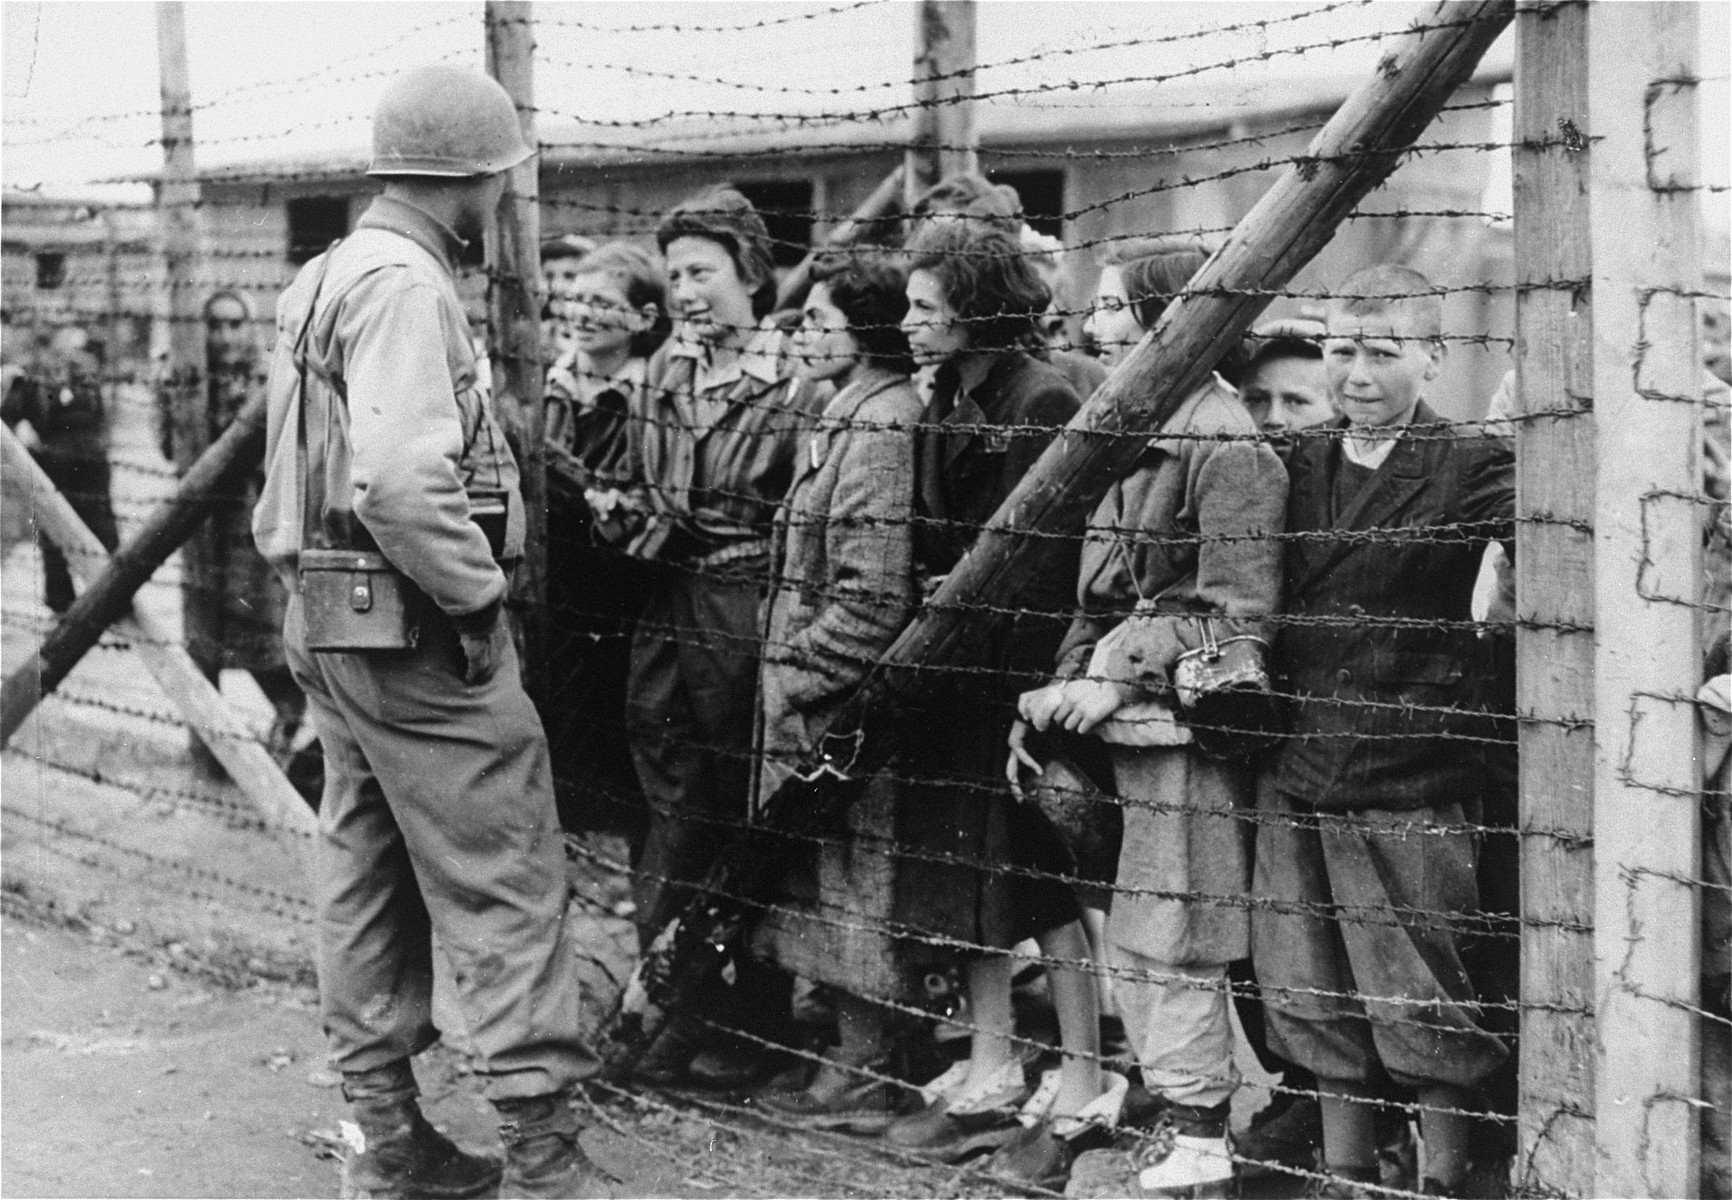 Women and children survivors in Mauthausen speak to an American liberator through a barbed wire fence.